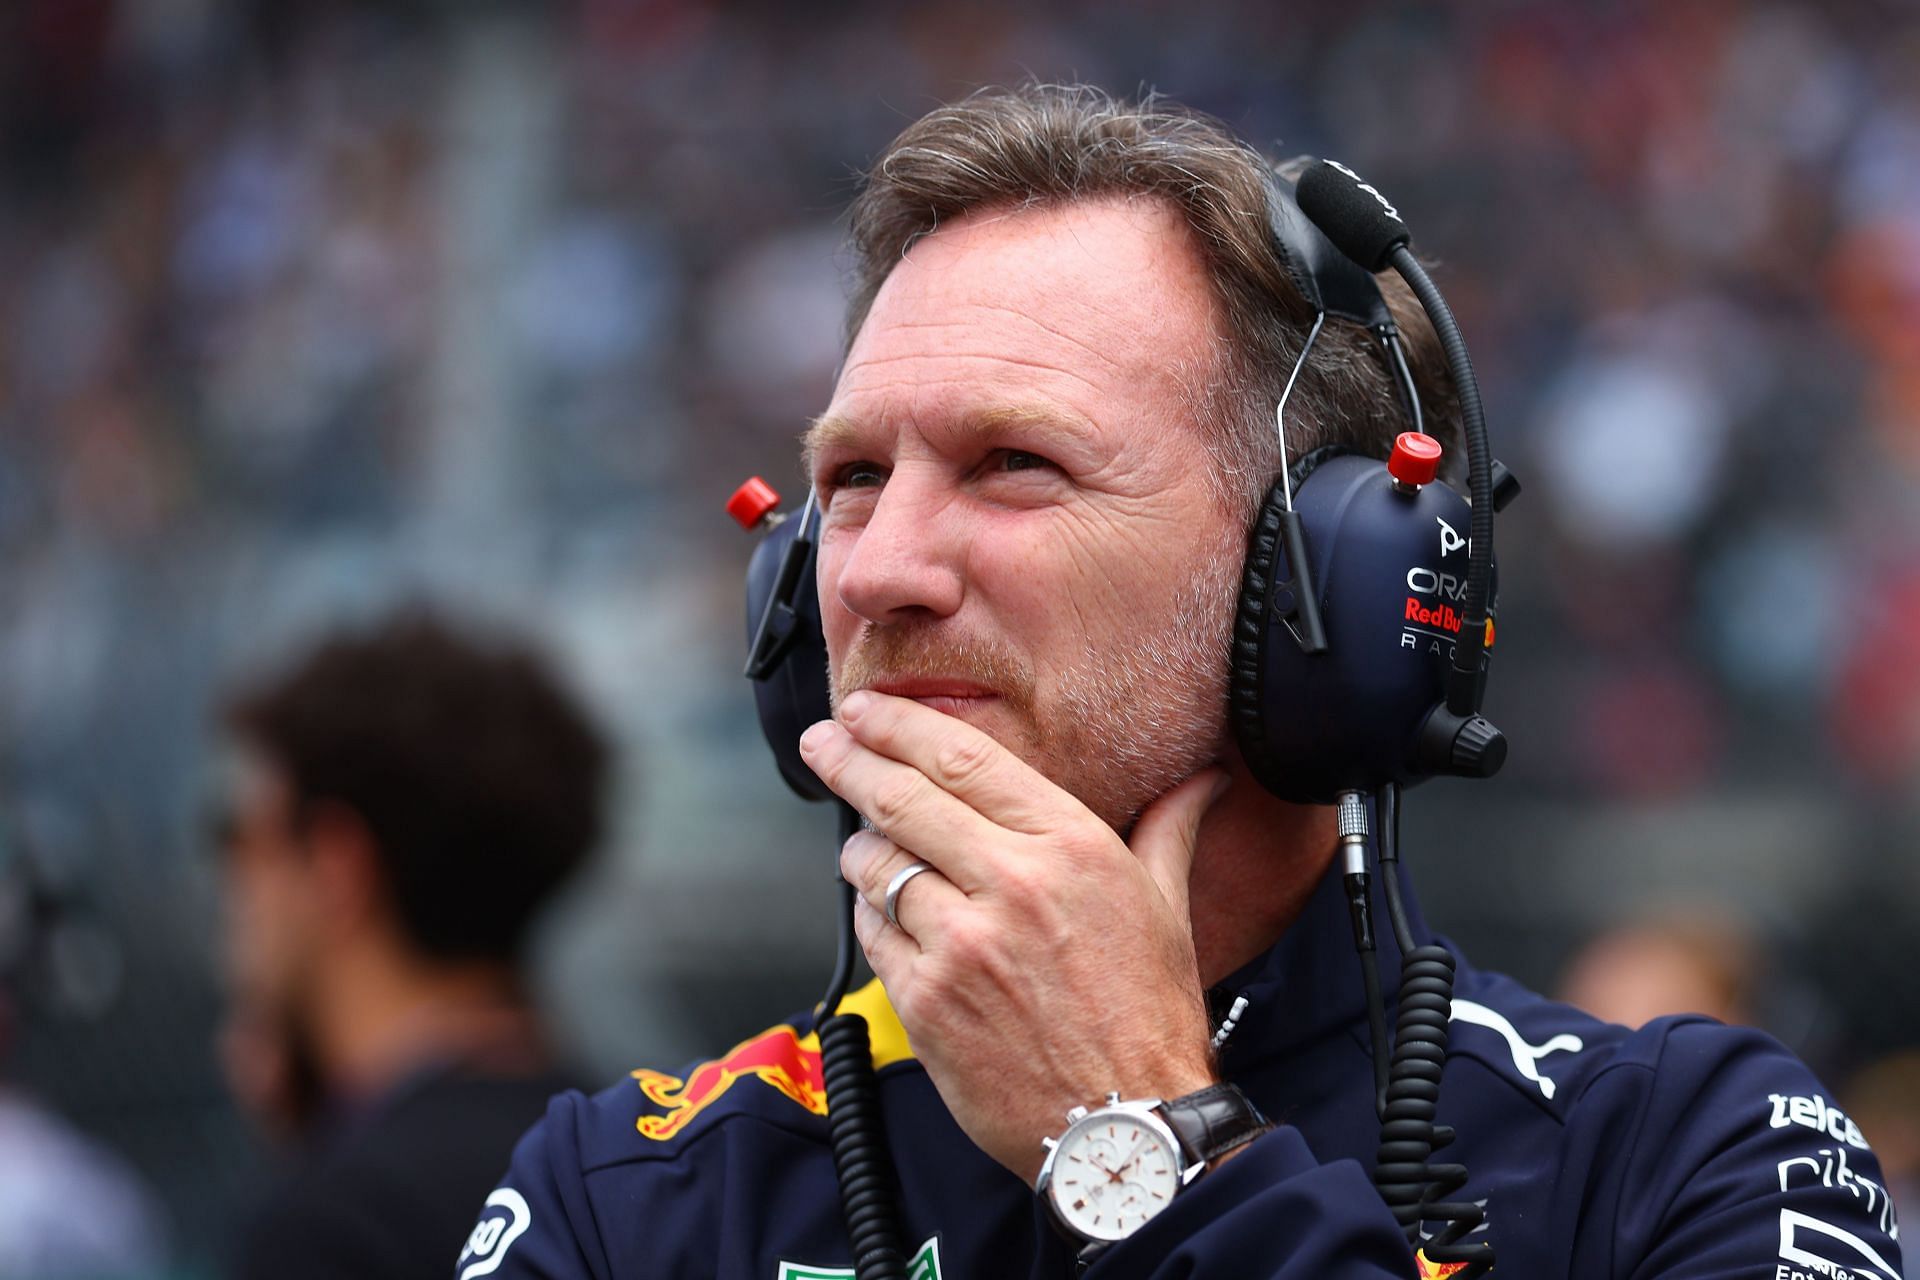 Christian Horner expects track limits to be a much bigger issue at the French GP later next weekend